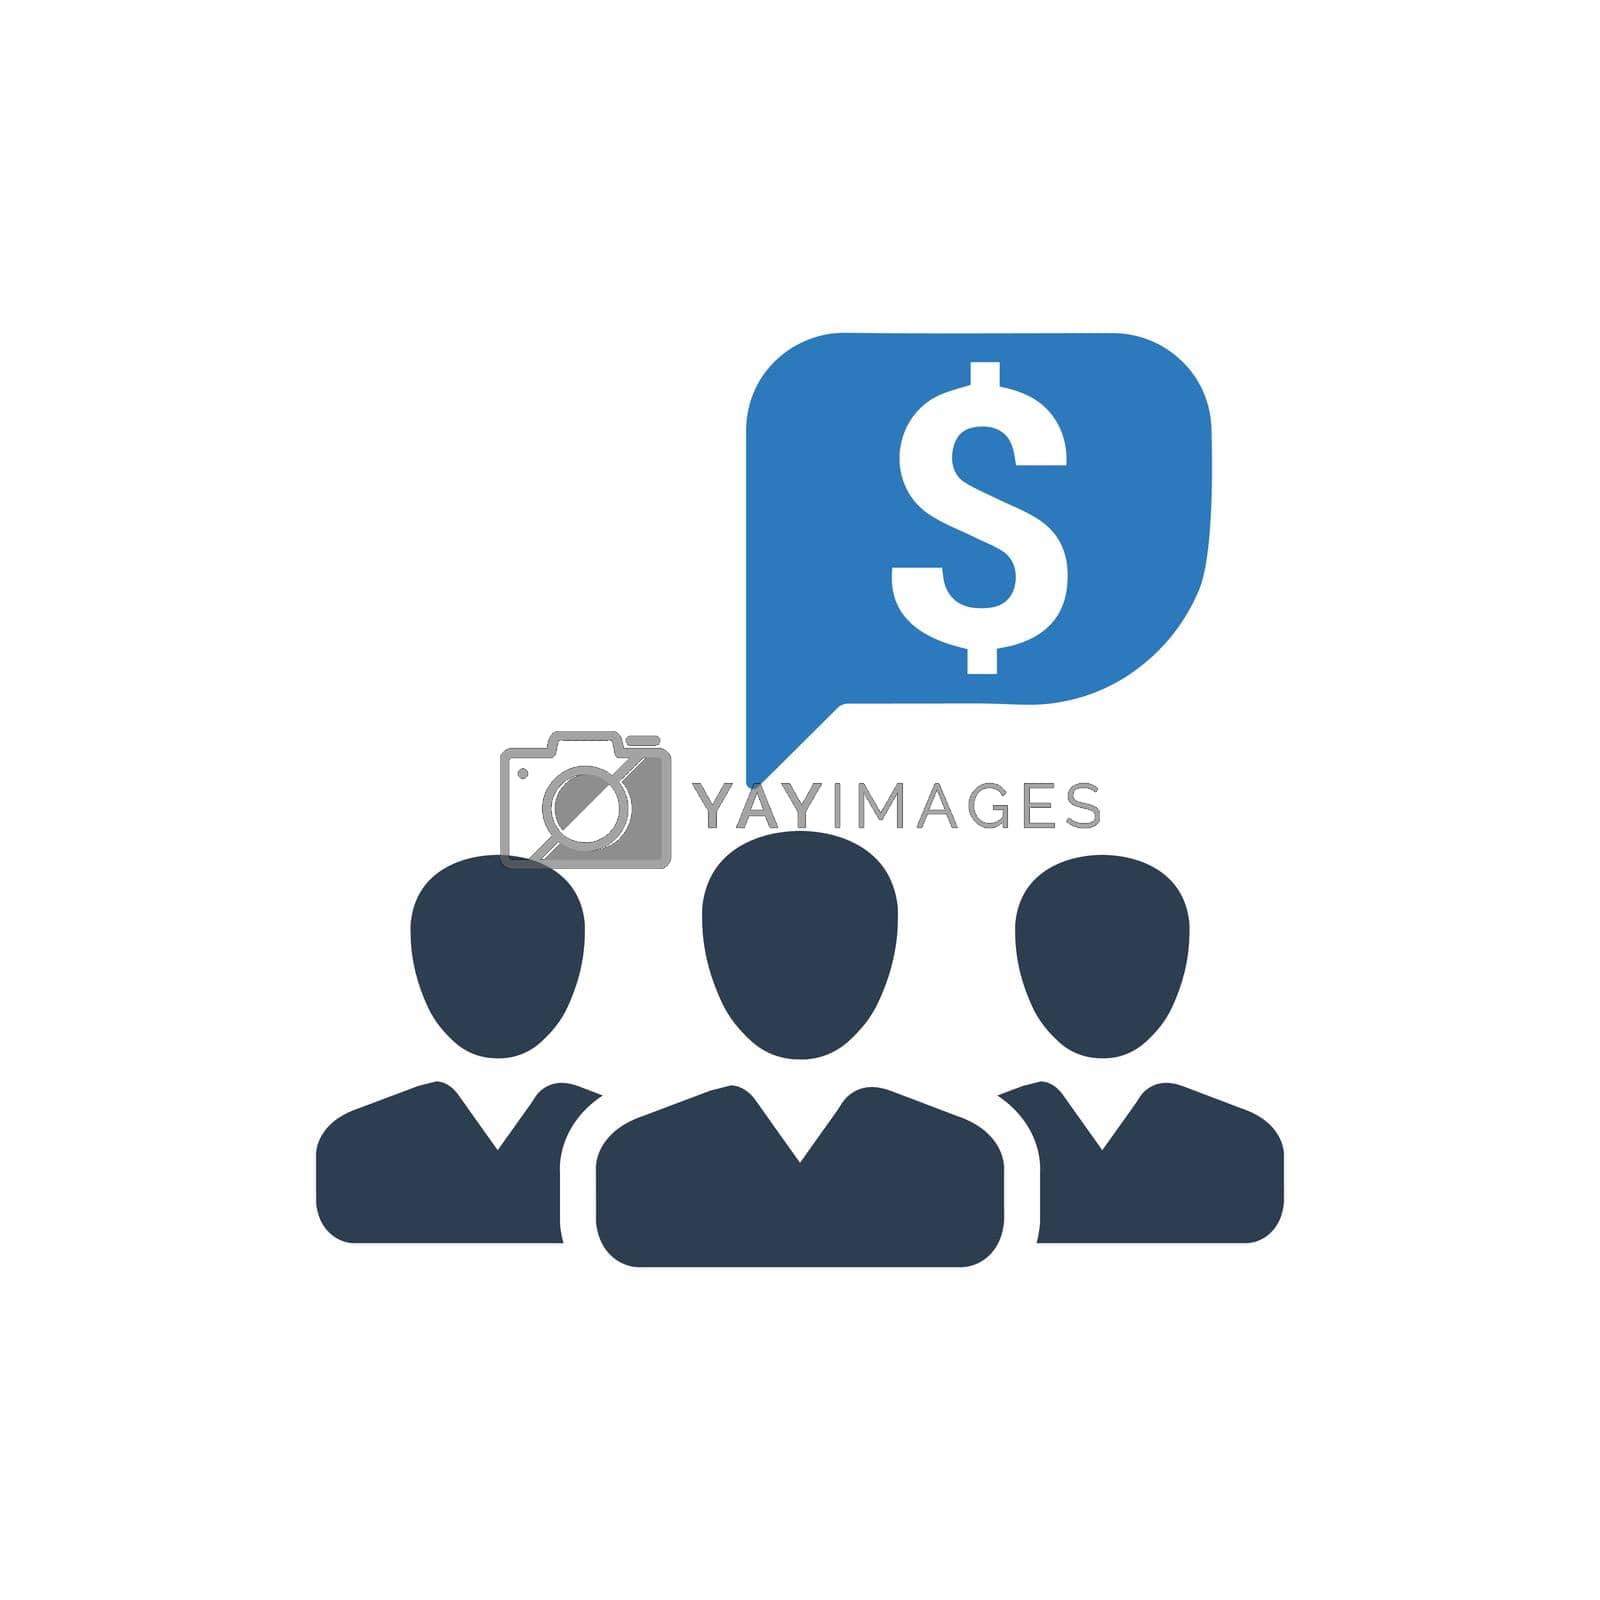 Royalty free image of Financial Discussion Icon by delwar018